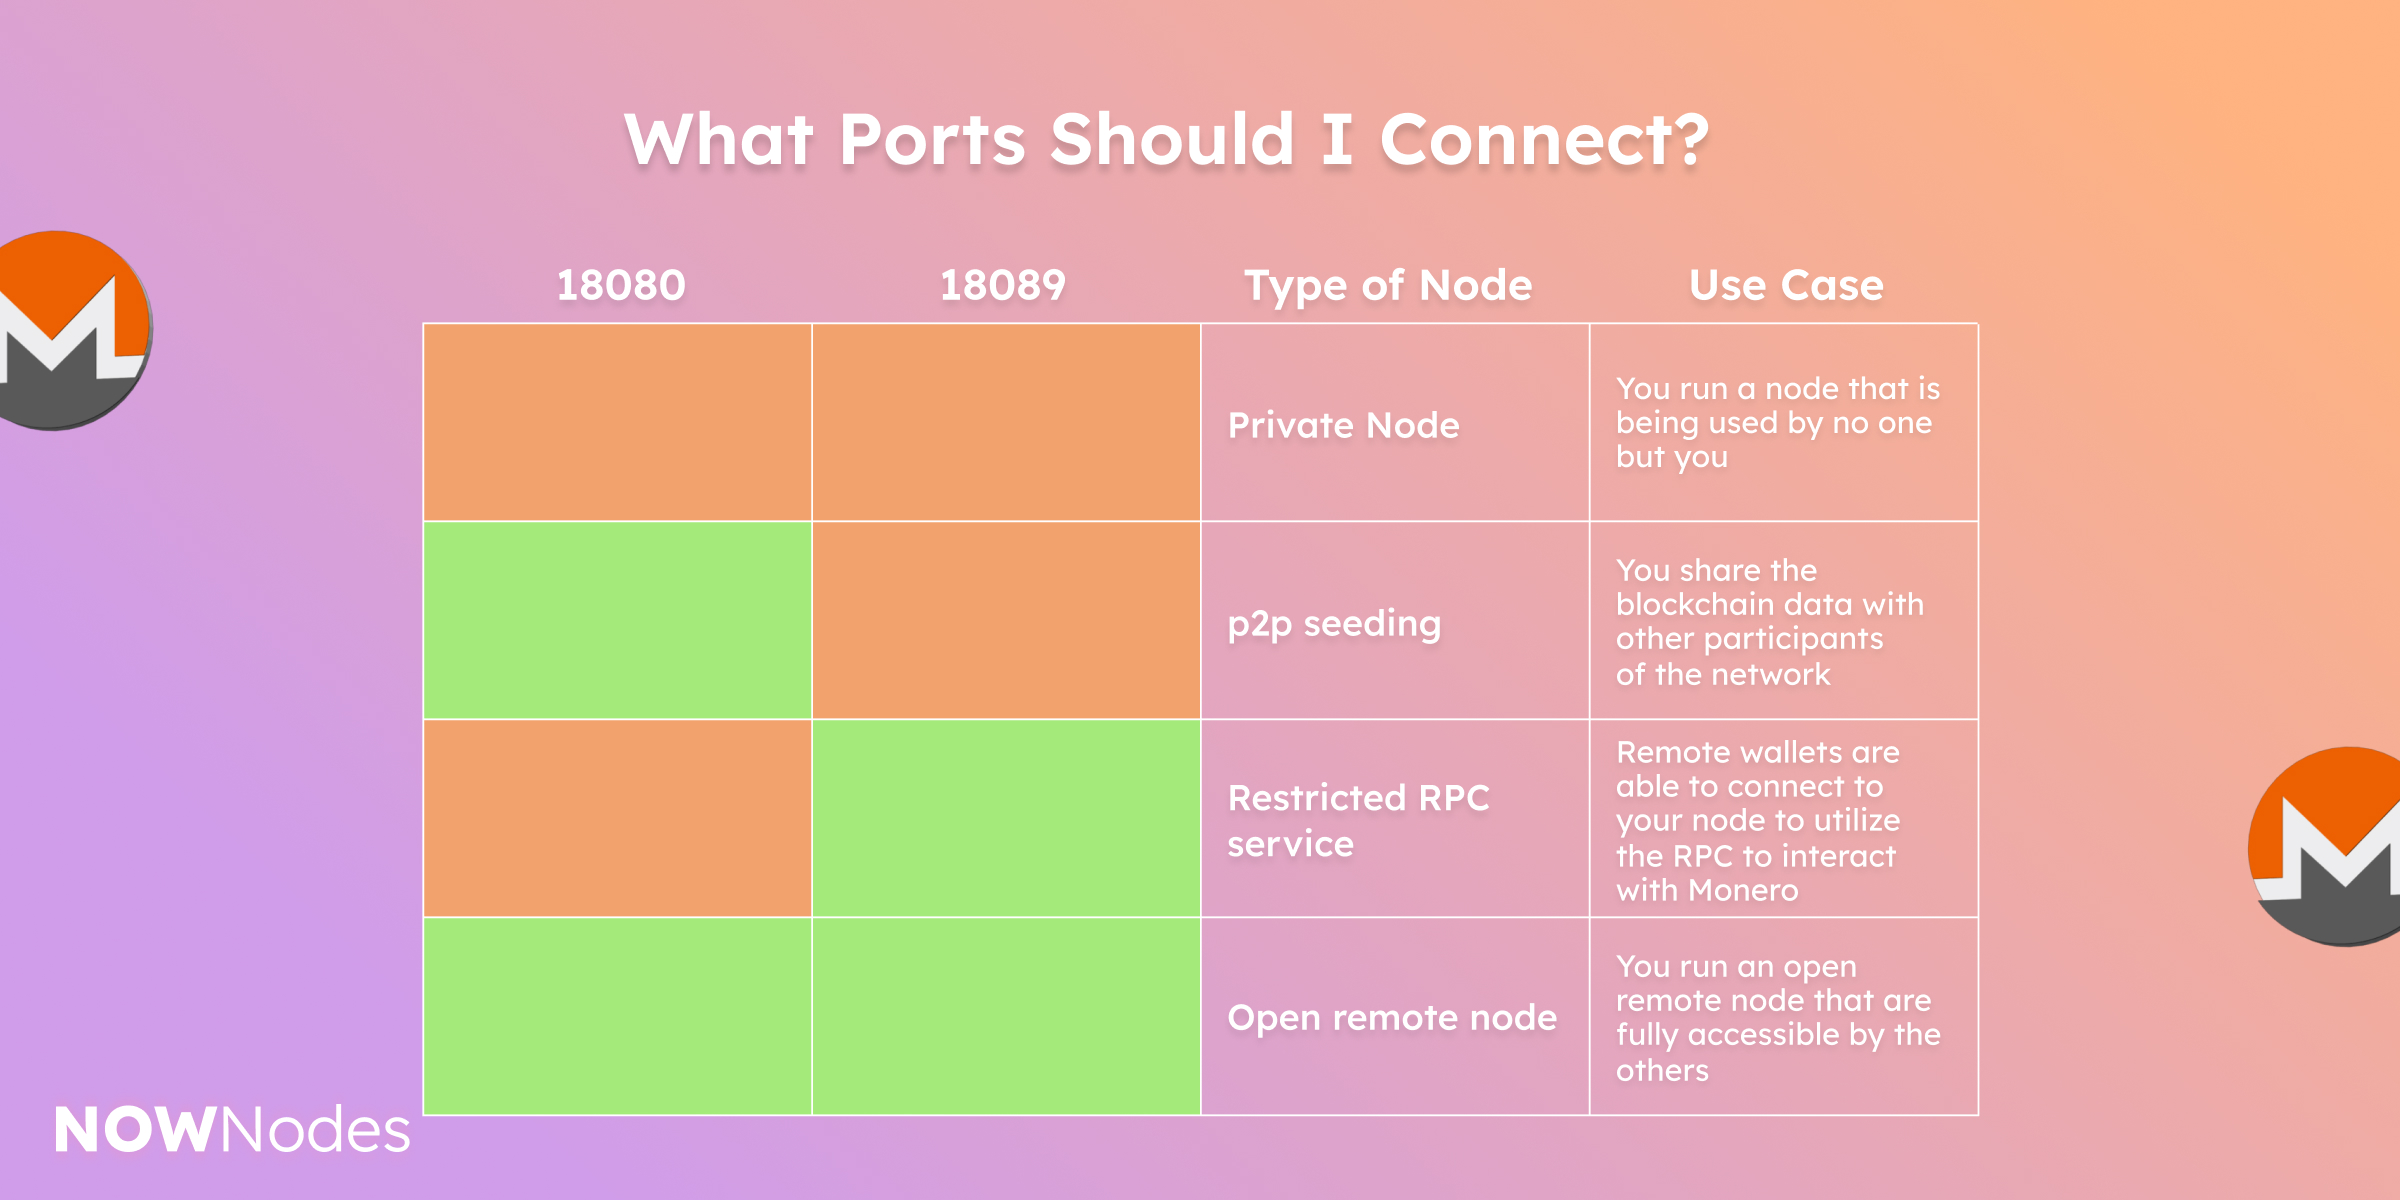 What Ports Should I Connect?

18080
18089
Node
Use Case 




Private Node
You run a node that is being used by no one but you 




p2p seeding
You share the blockchain data with other participants of the network





Restricted RPC service
Remote wallets are able to connect to your node to utilize the RPC to interact with Monero






Open remote node



You run an open remote node that are fully accessible by the others

NOWNodes

